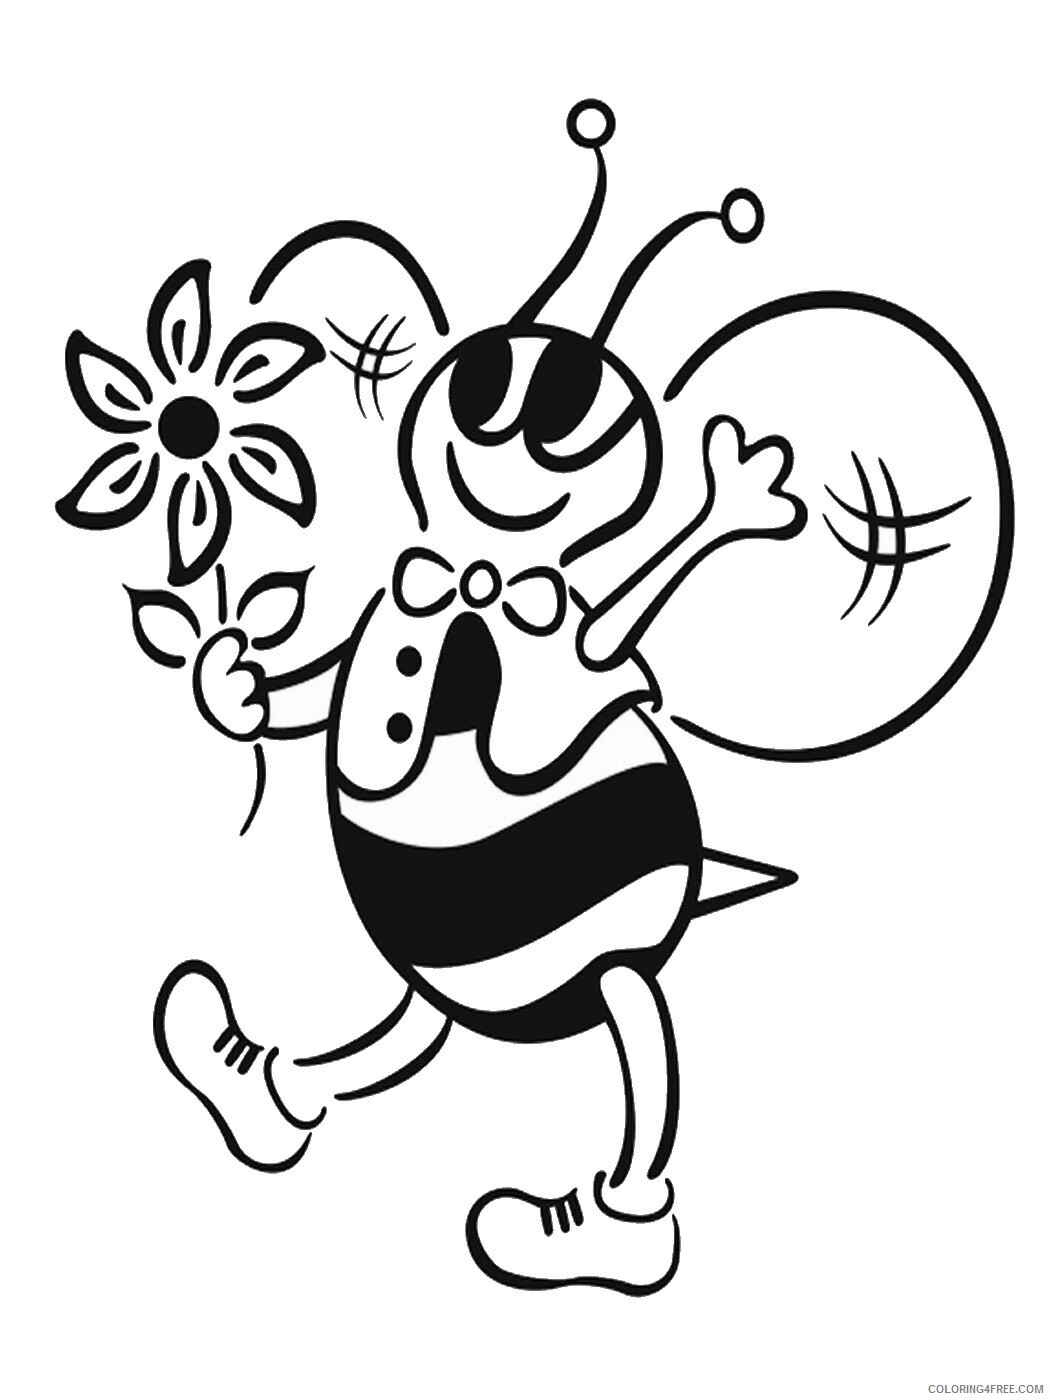 Bee Coloring Pages Animal Printable Sheets bee_cl_12 2021 0367 Coloring4free